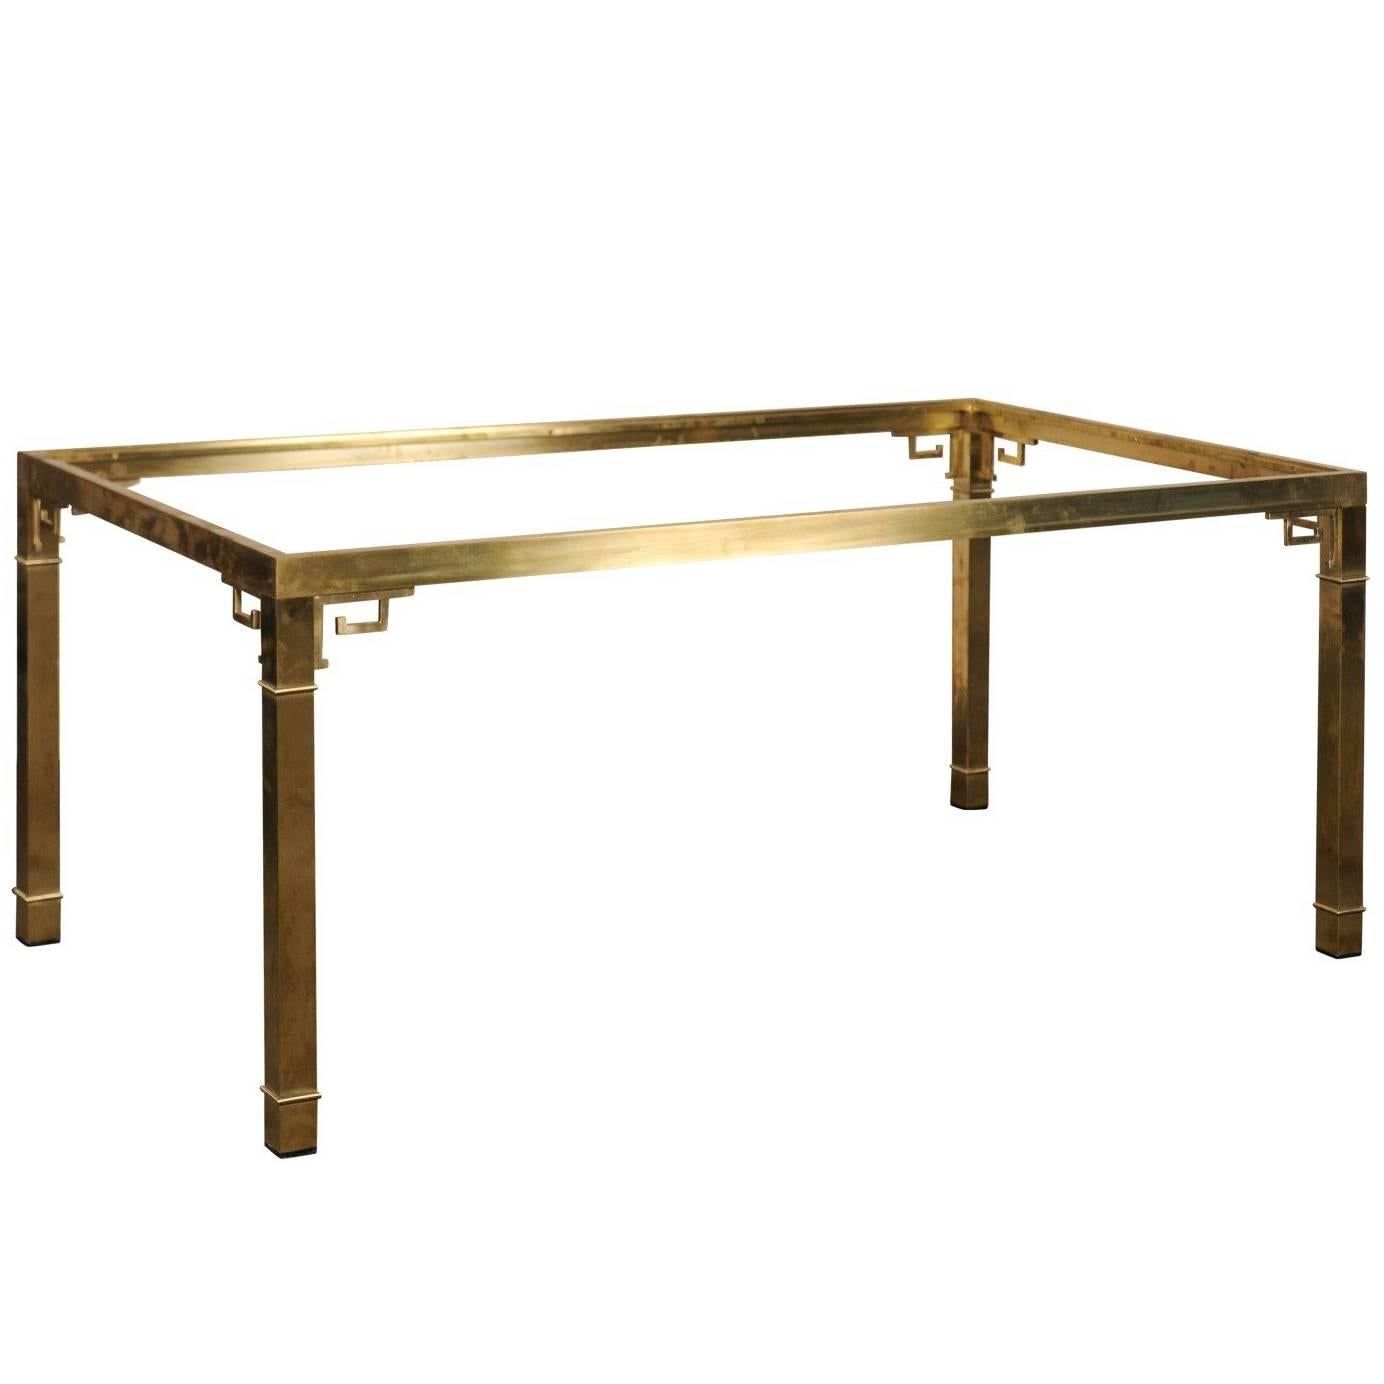 Italian Brass Dining Table in the Style of Mastercraft, circa 1970s